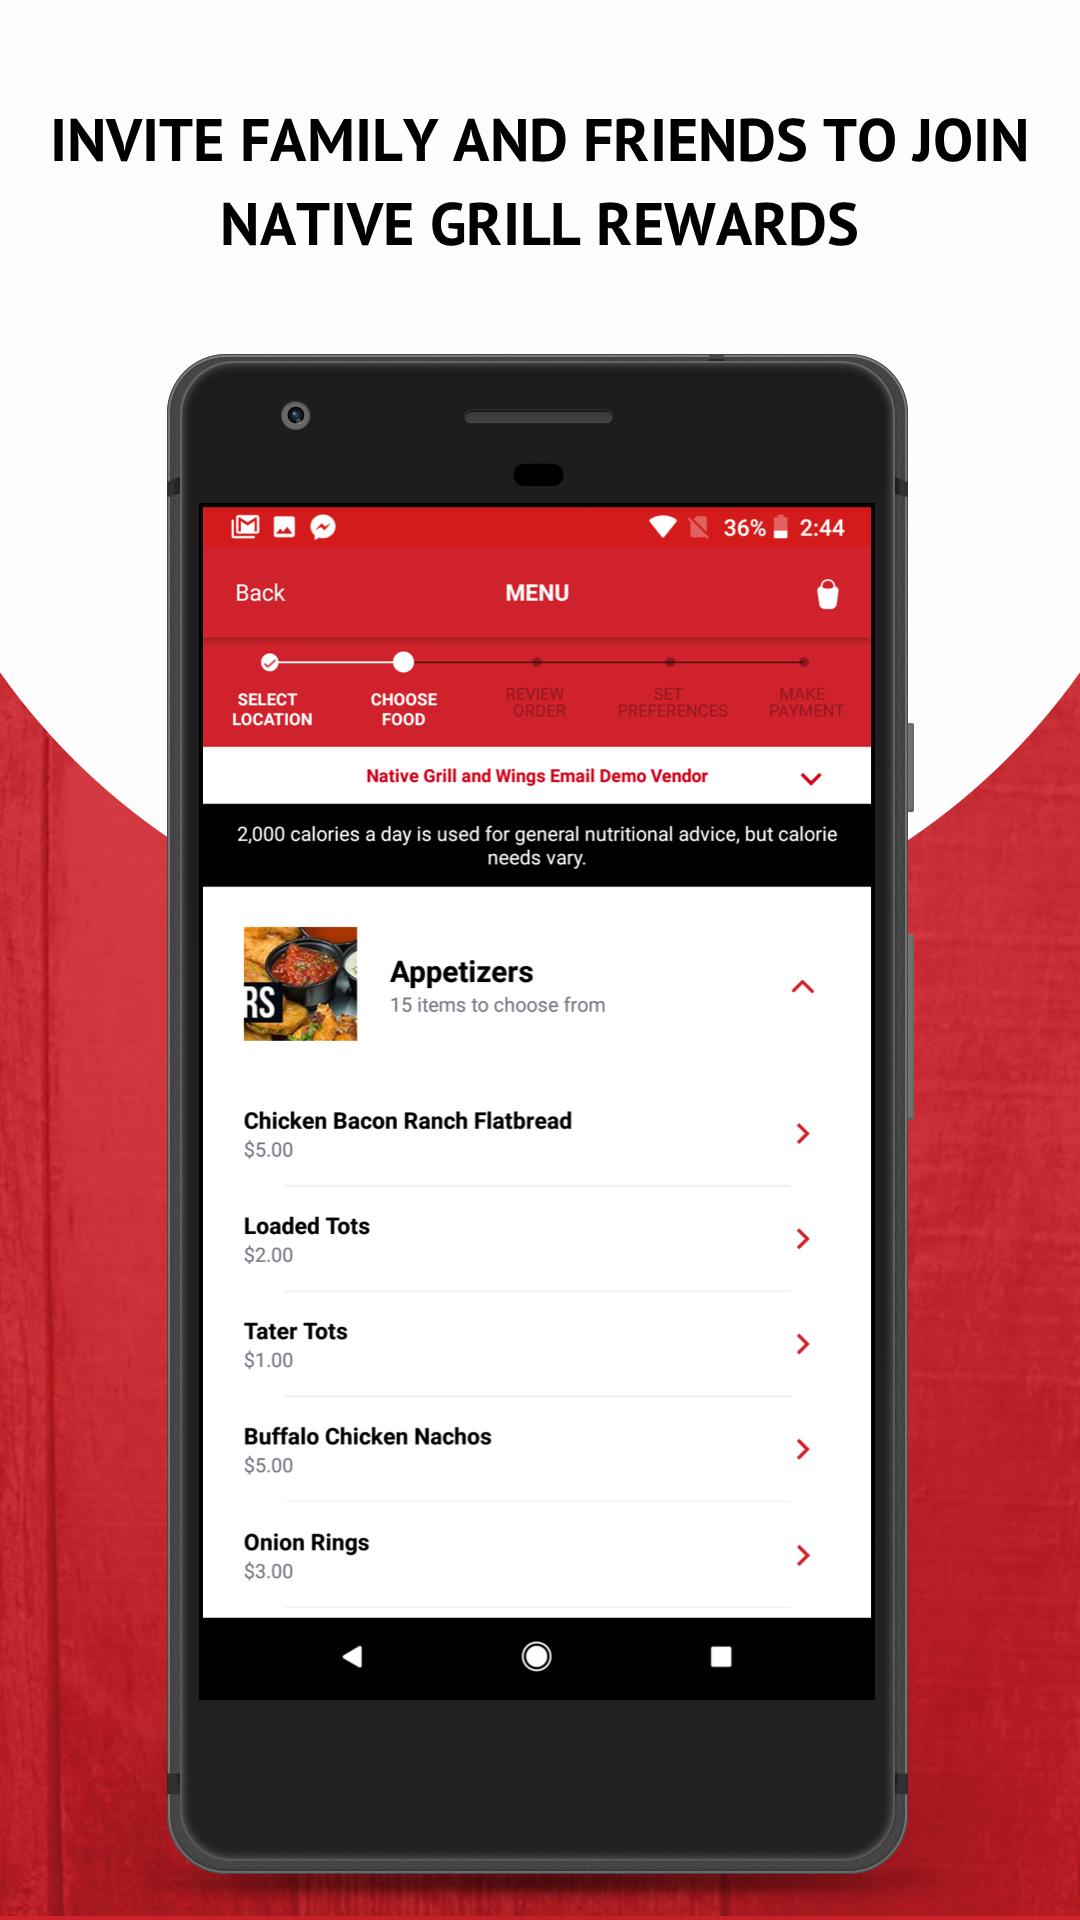 Native Grill and Wings 2.1 Screenshot 3